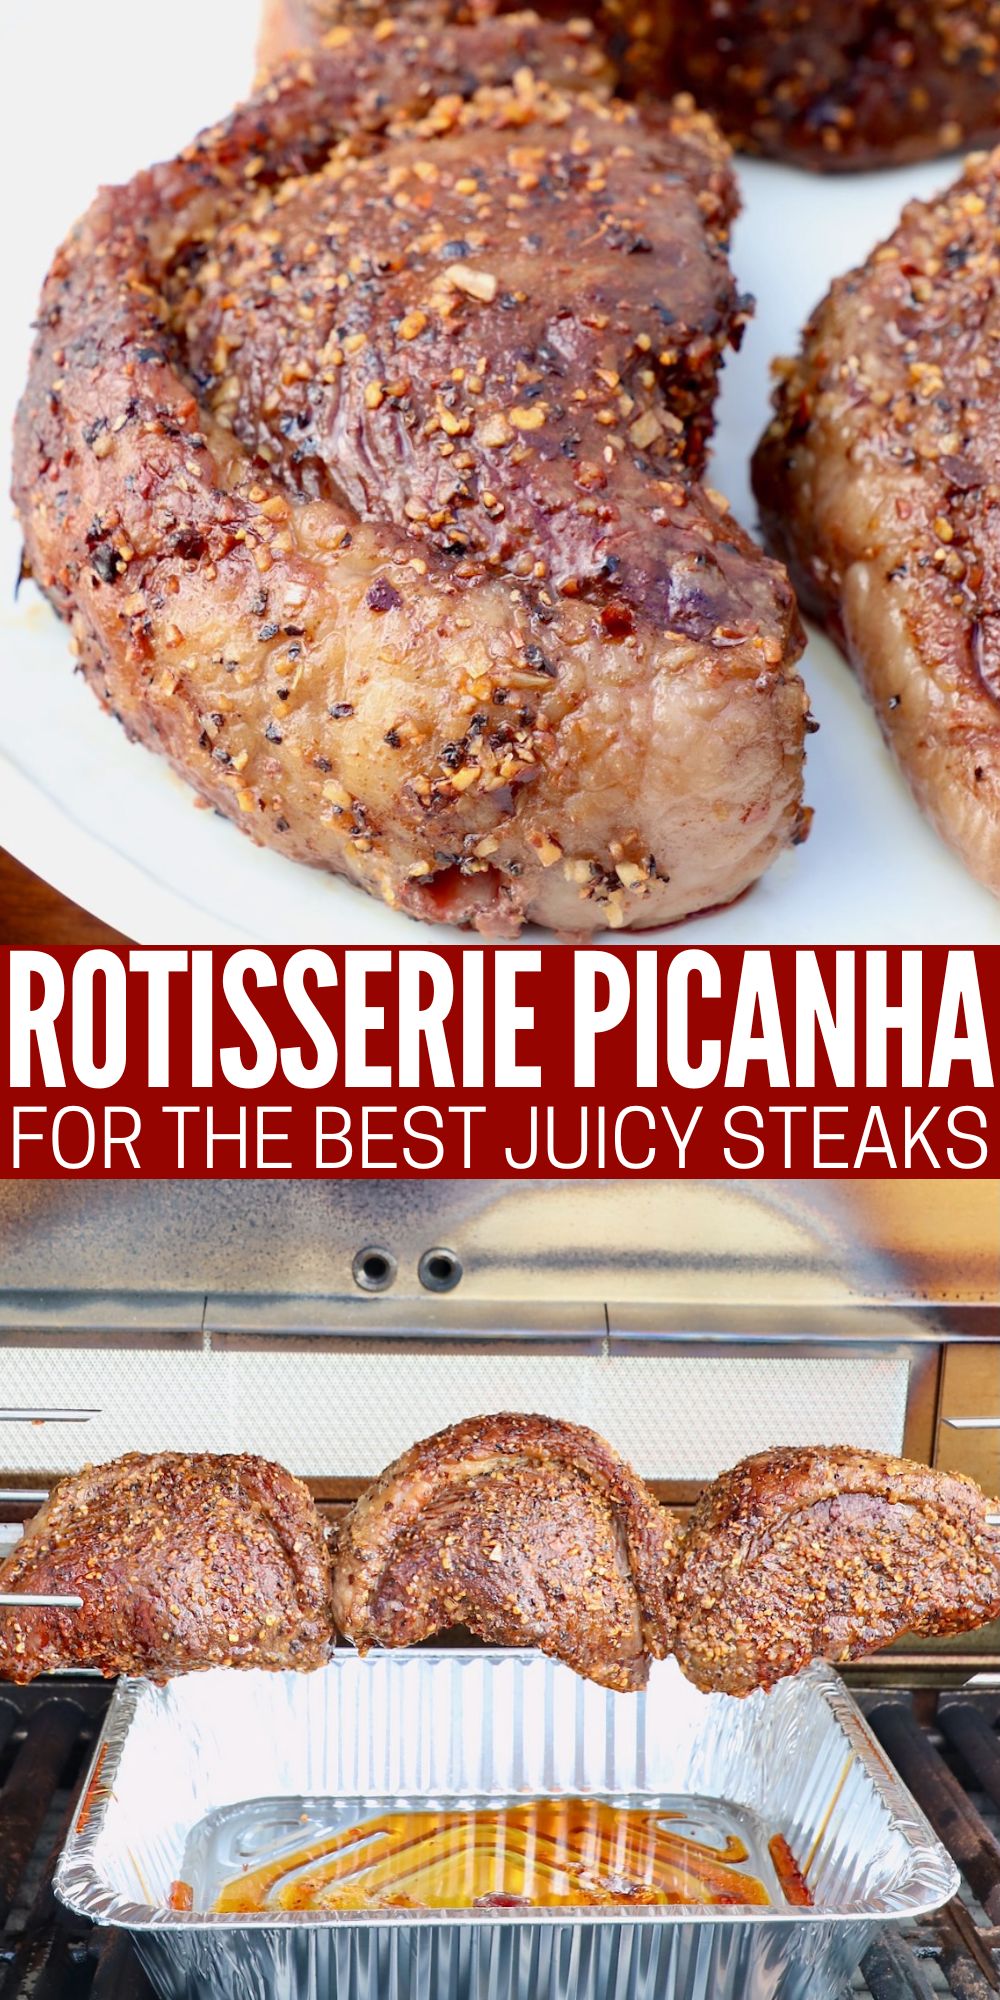 What is Picanha? + How To Cook It